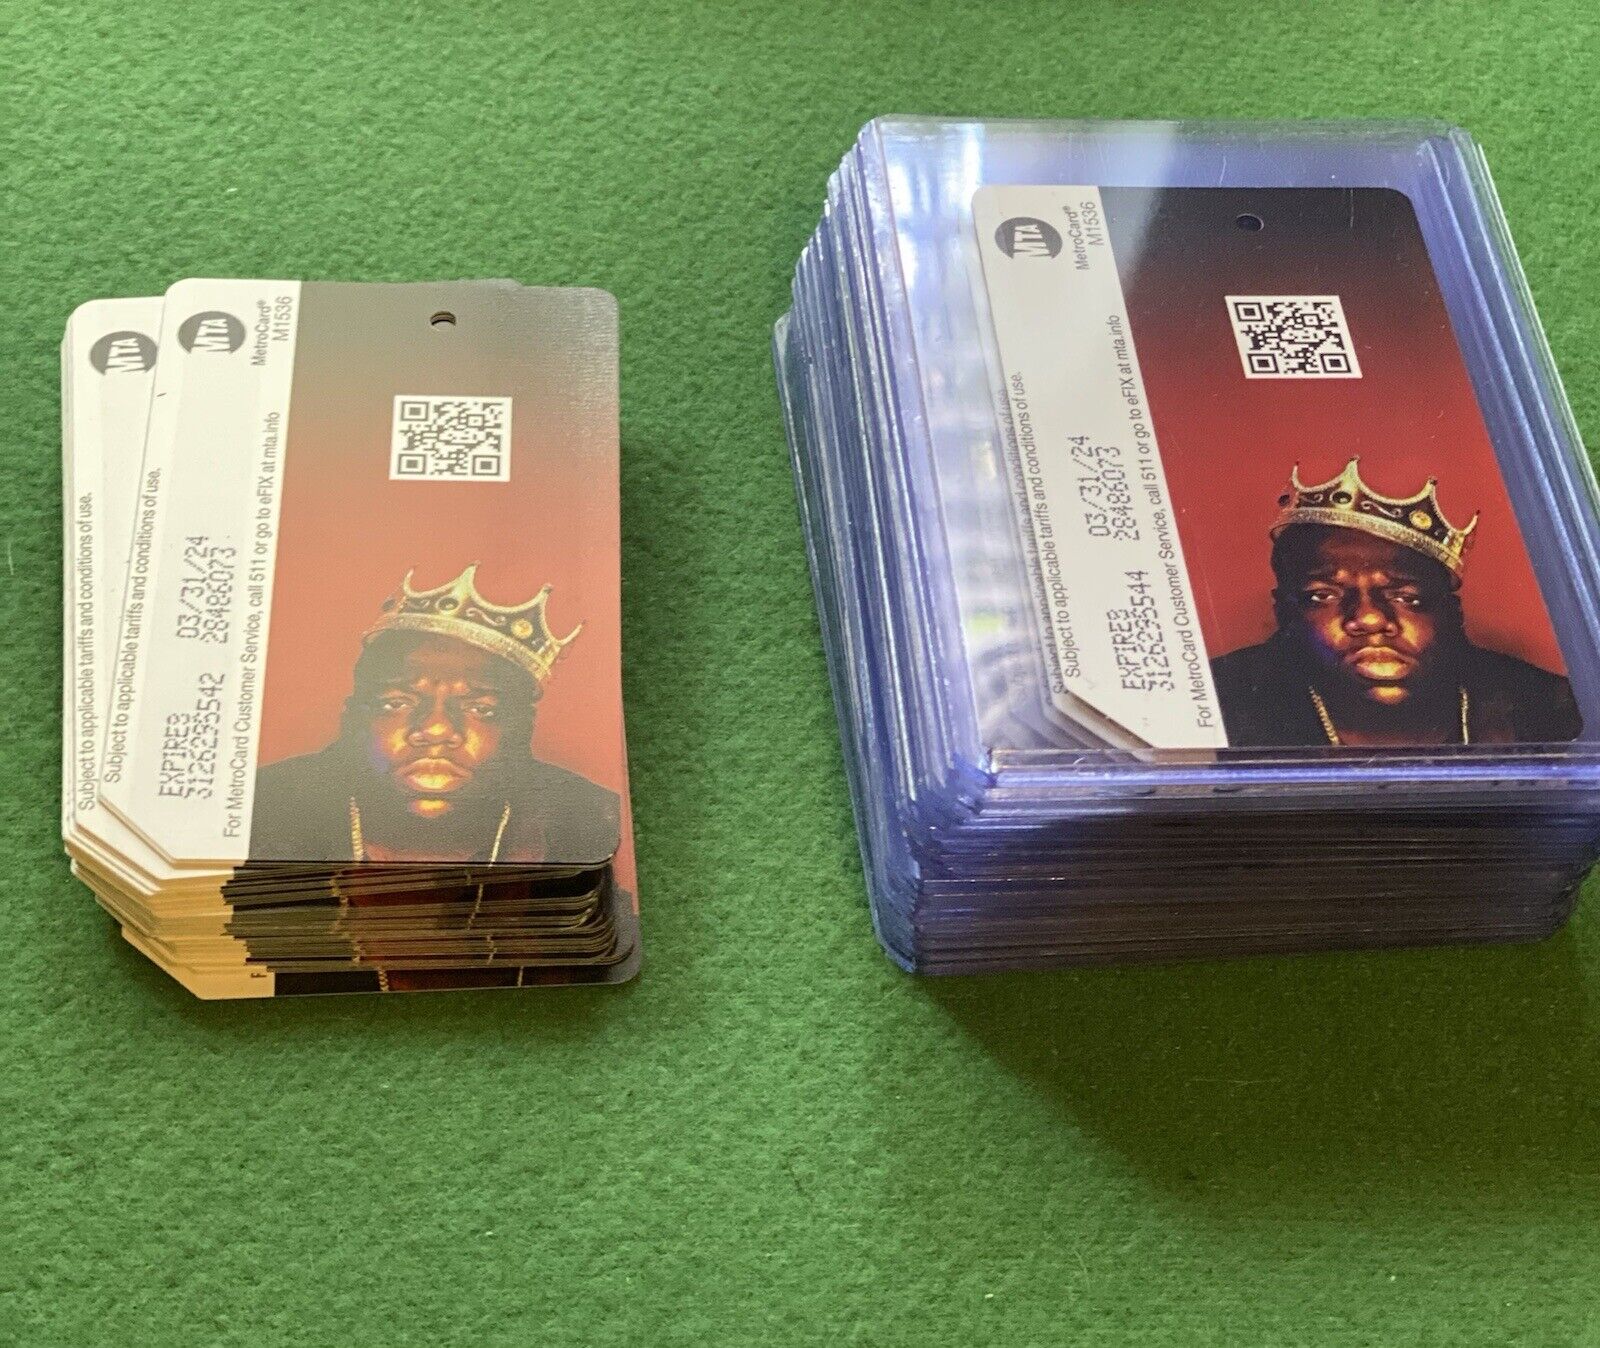 Biggie Smalls “The Notorious B.I.G.” Metro Card 2022 Limited Edition 